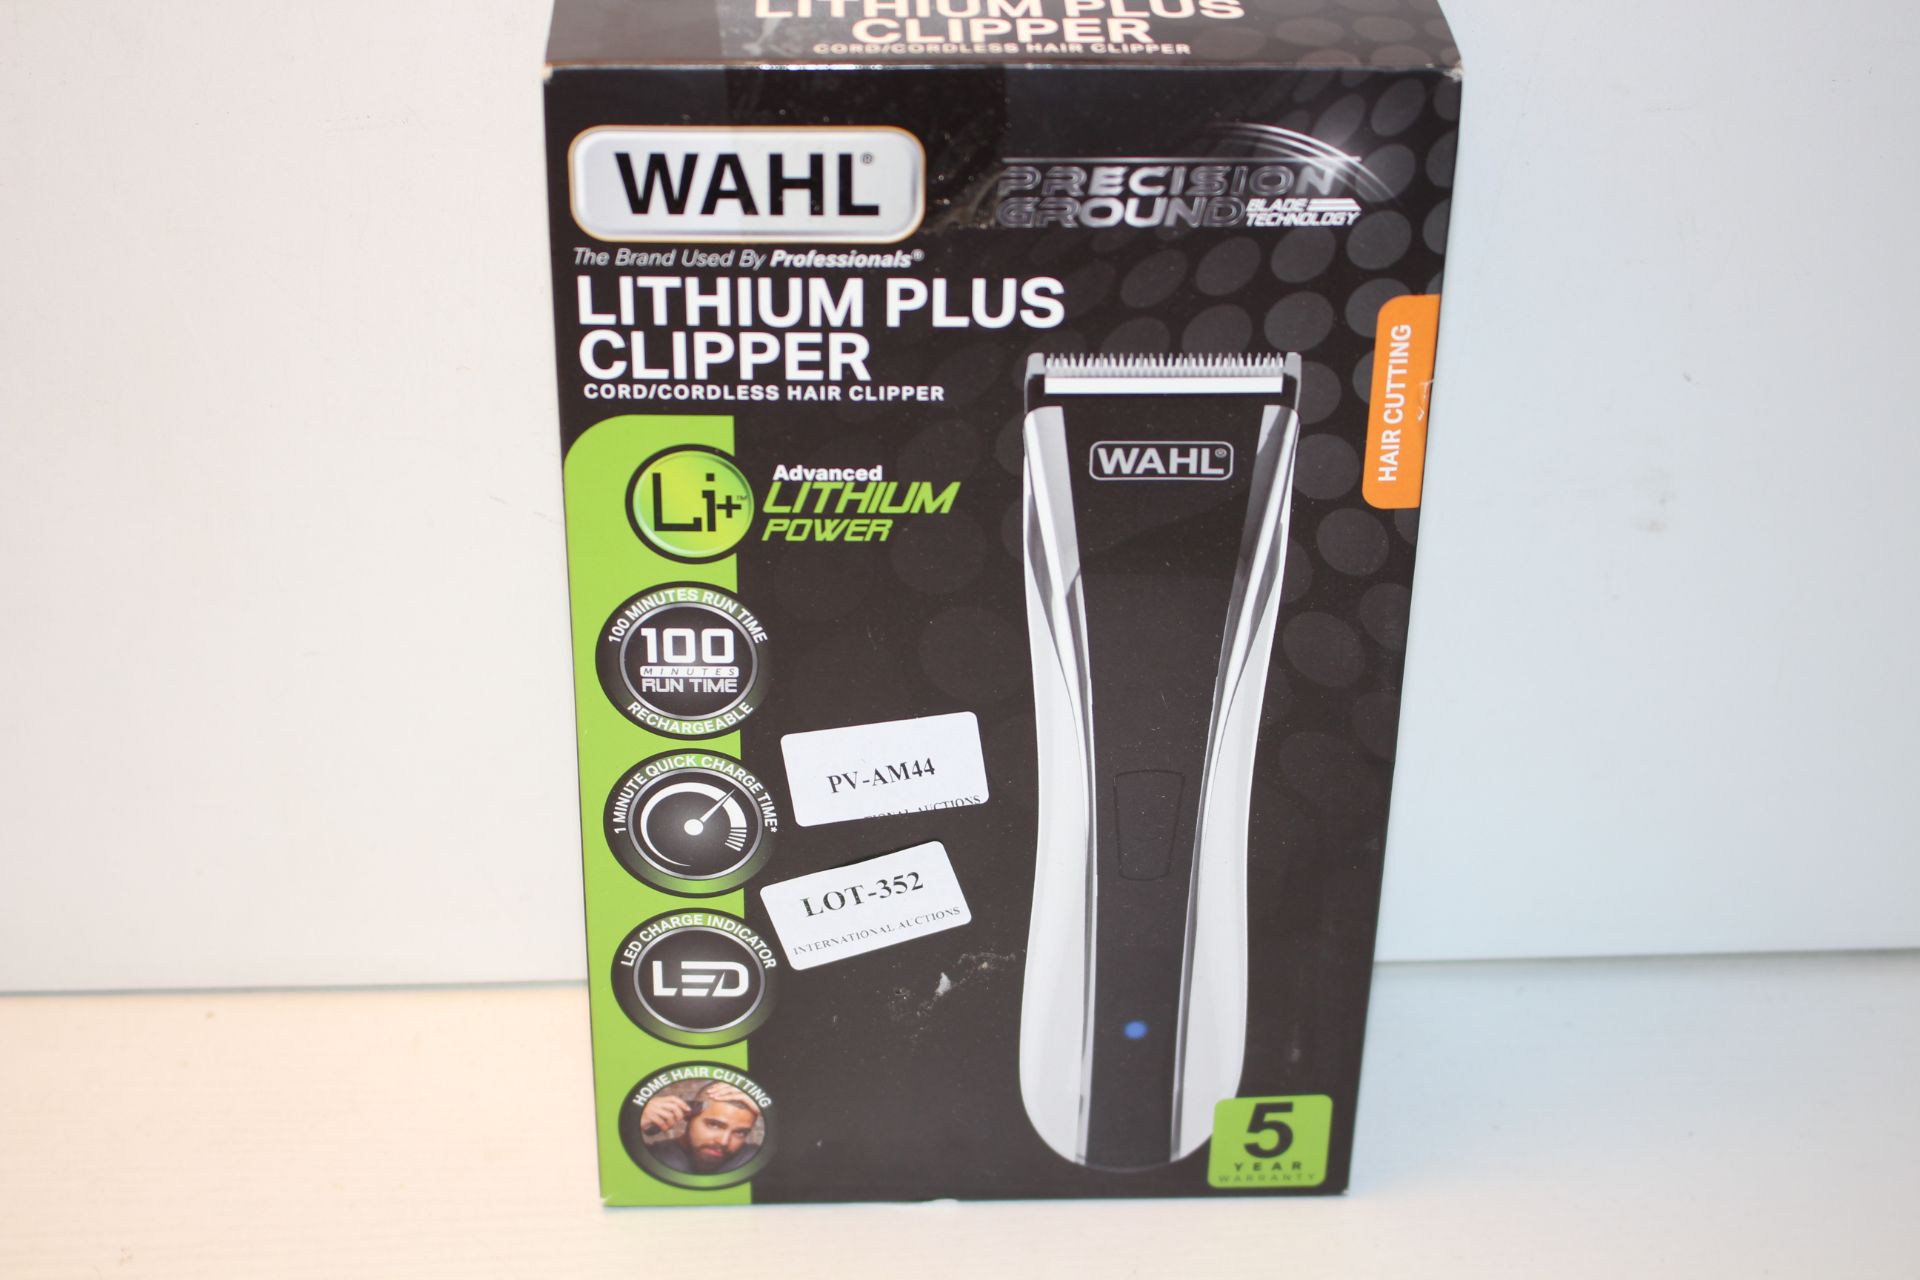 BOXED WAHL LITHIUM PLUS CLIPPER CORD/CORDLESS HAIR CLIPPER RRP £49.95Condition ReportAppraisal